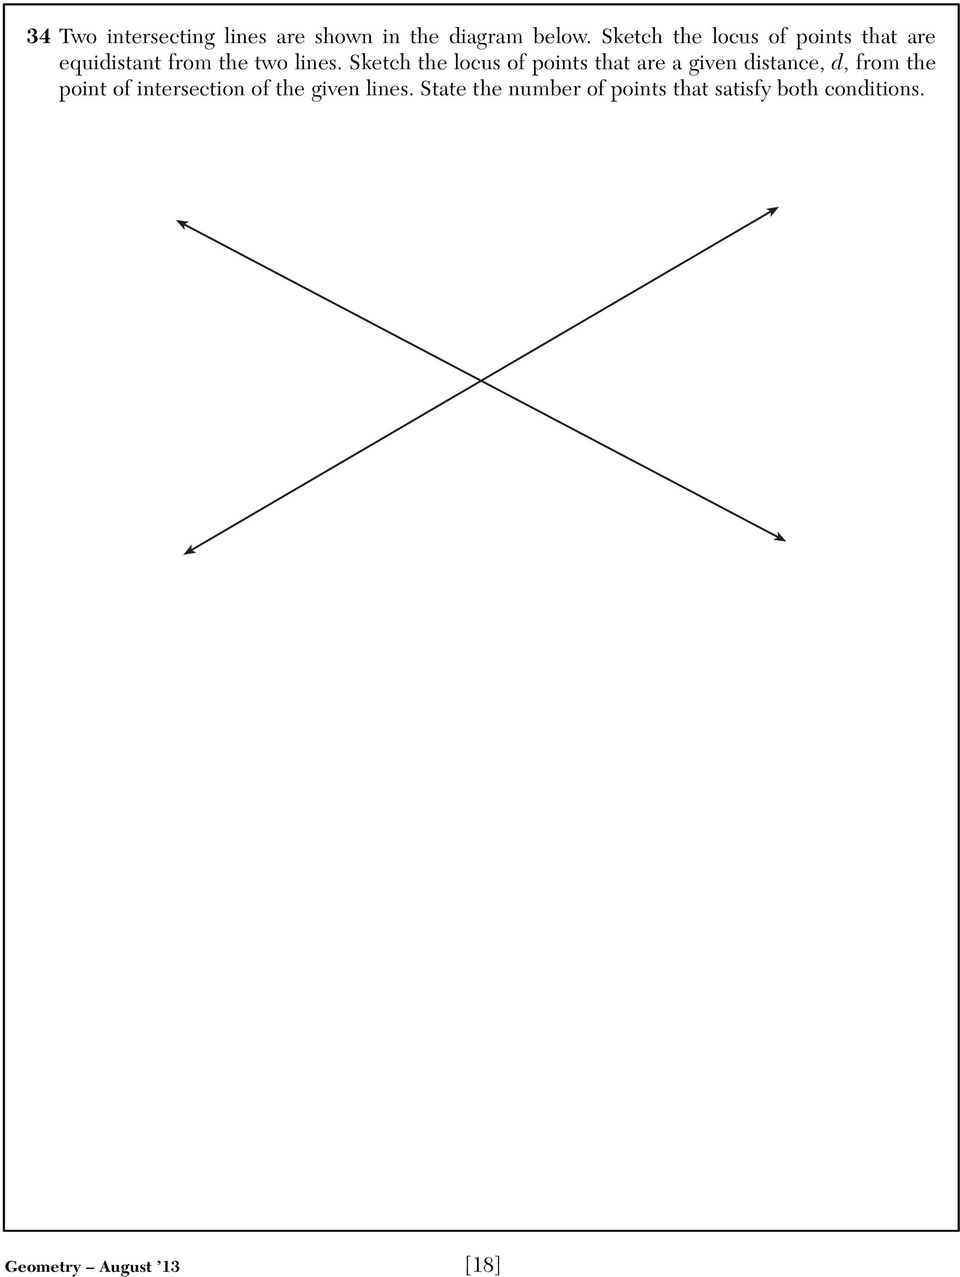 Sketch the locus of points that are a given distance, d, from the point of